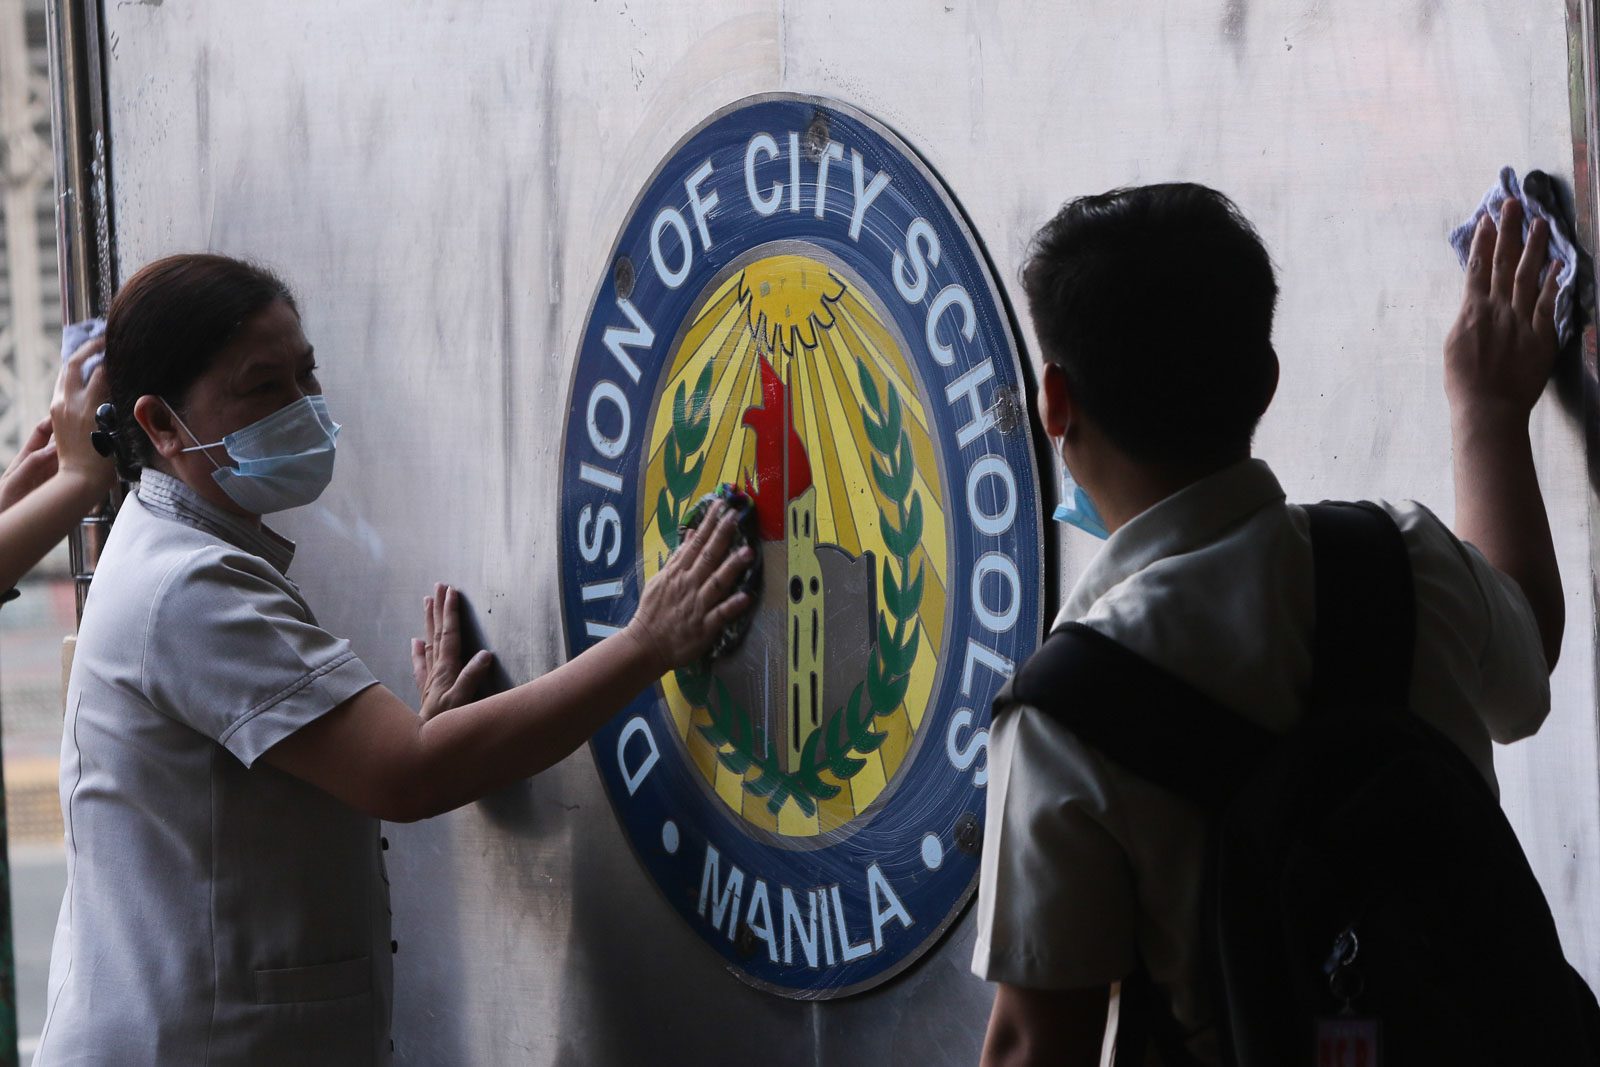 DepEd says proceeding with graduation ceremony ‘up to school’s discretion’